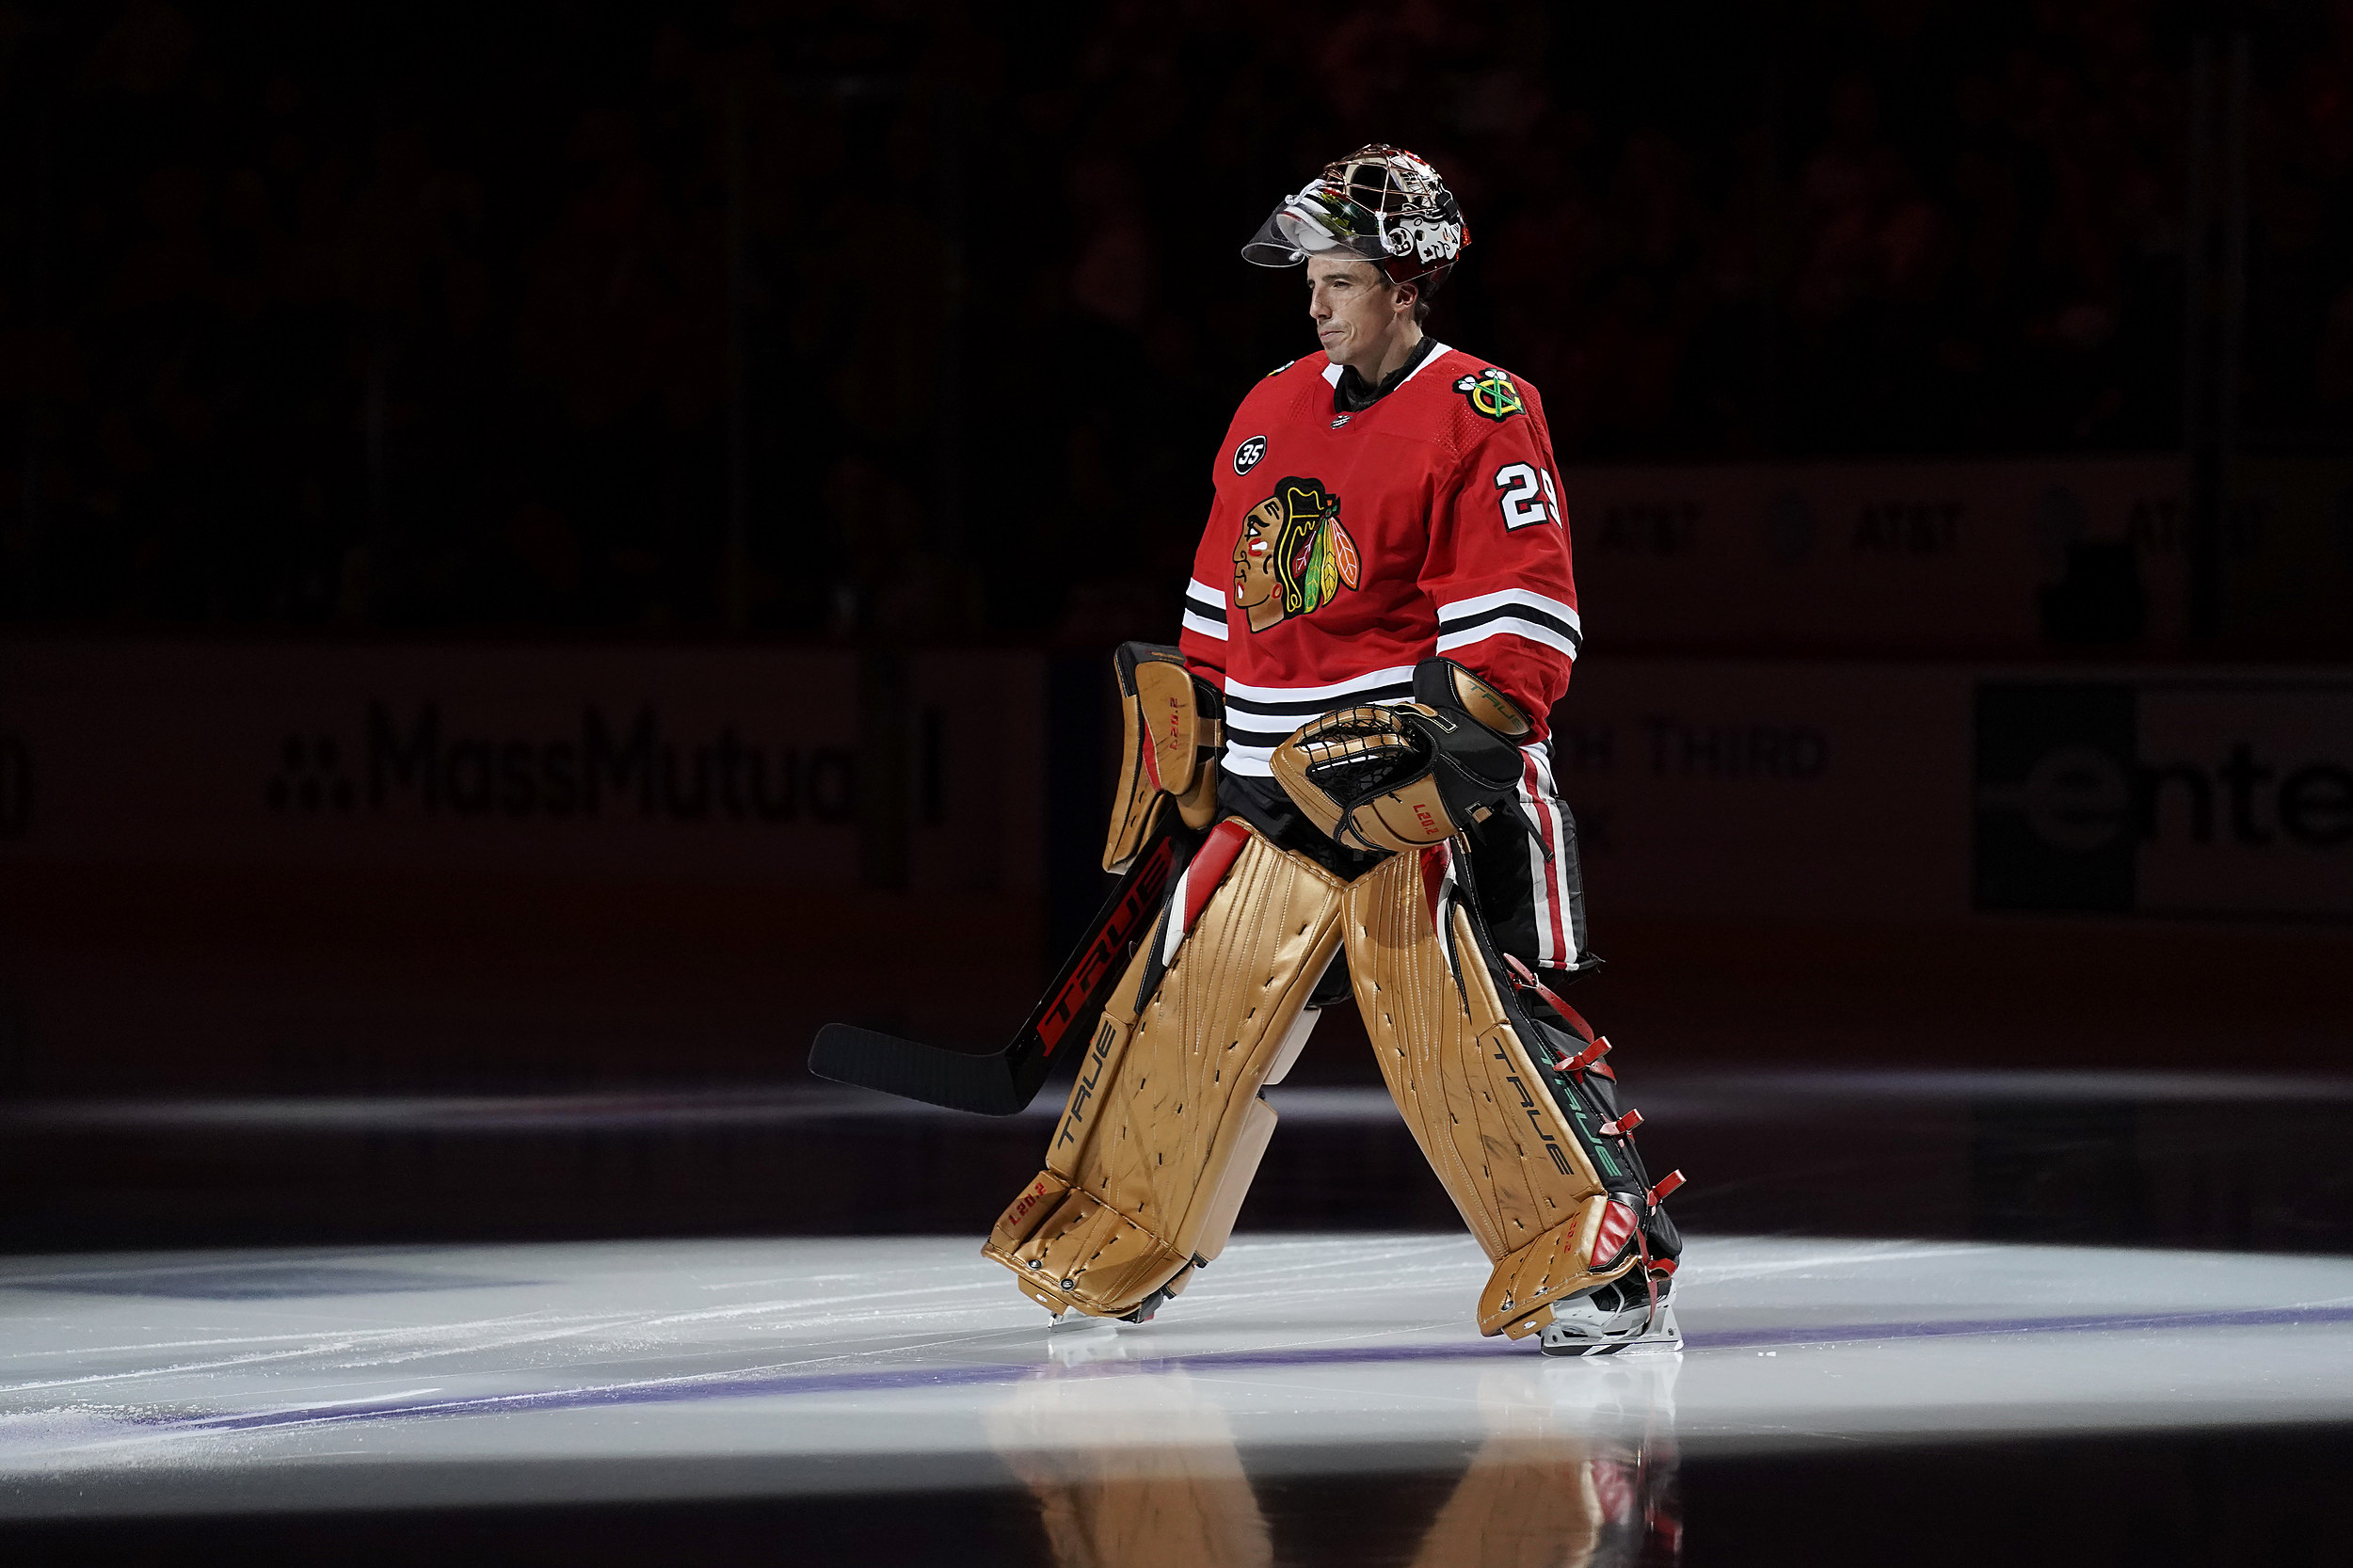 Chicago trades reigning Vezina winner Marc-Andre Fleury to Wild for draft  pick